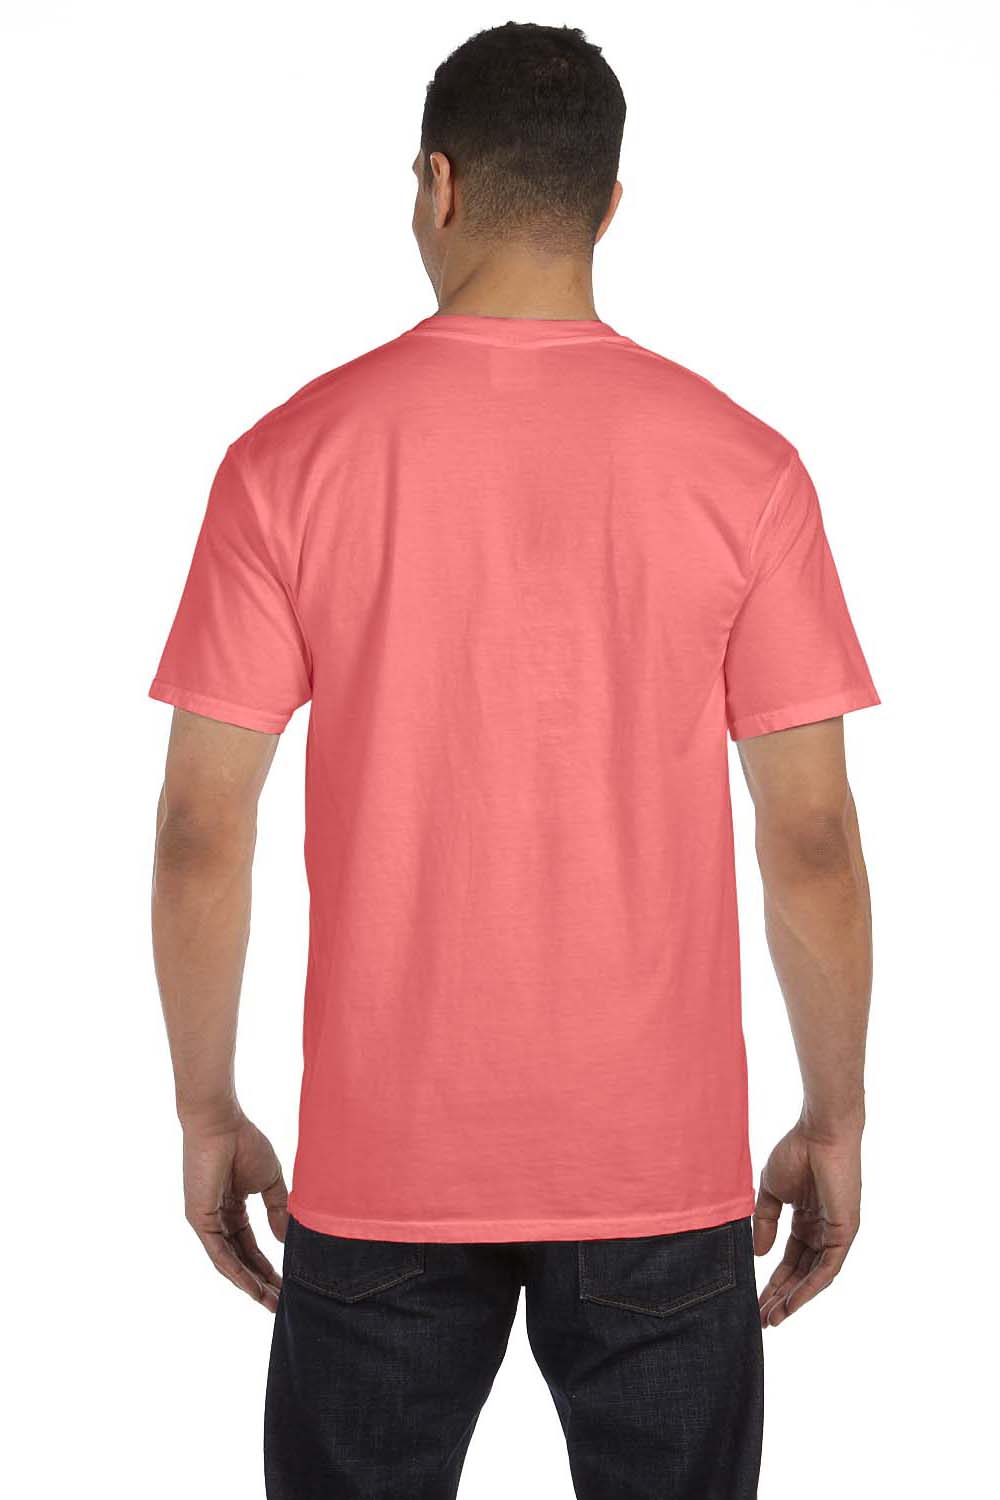 Pace Combed Cotton T-shirts Peach Blush